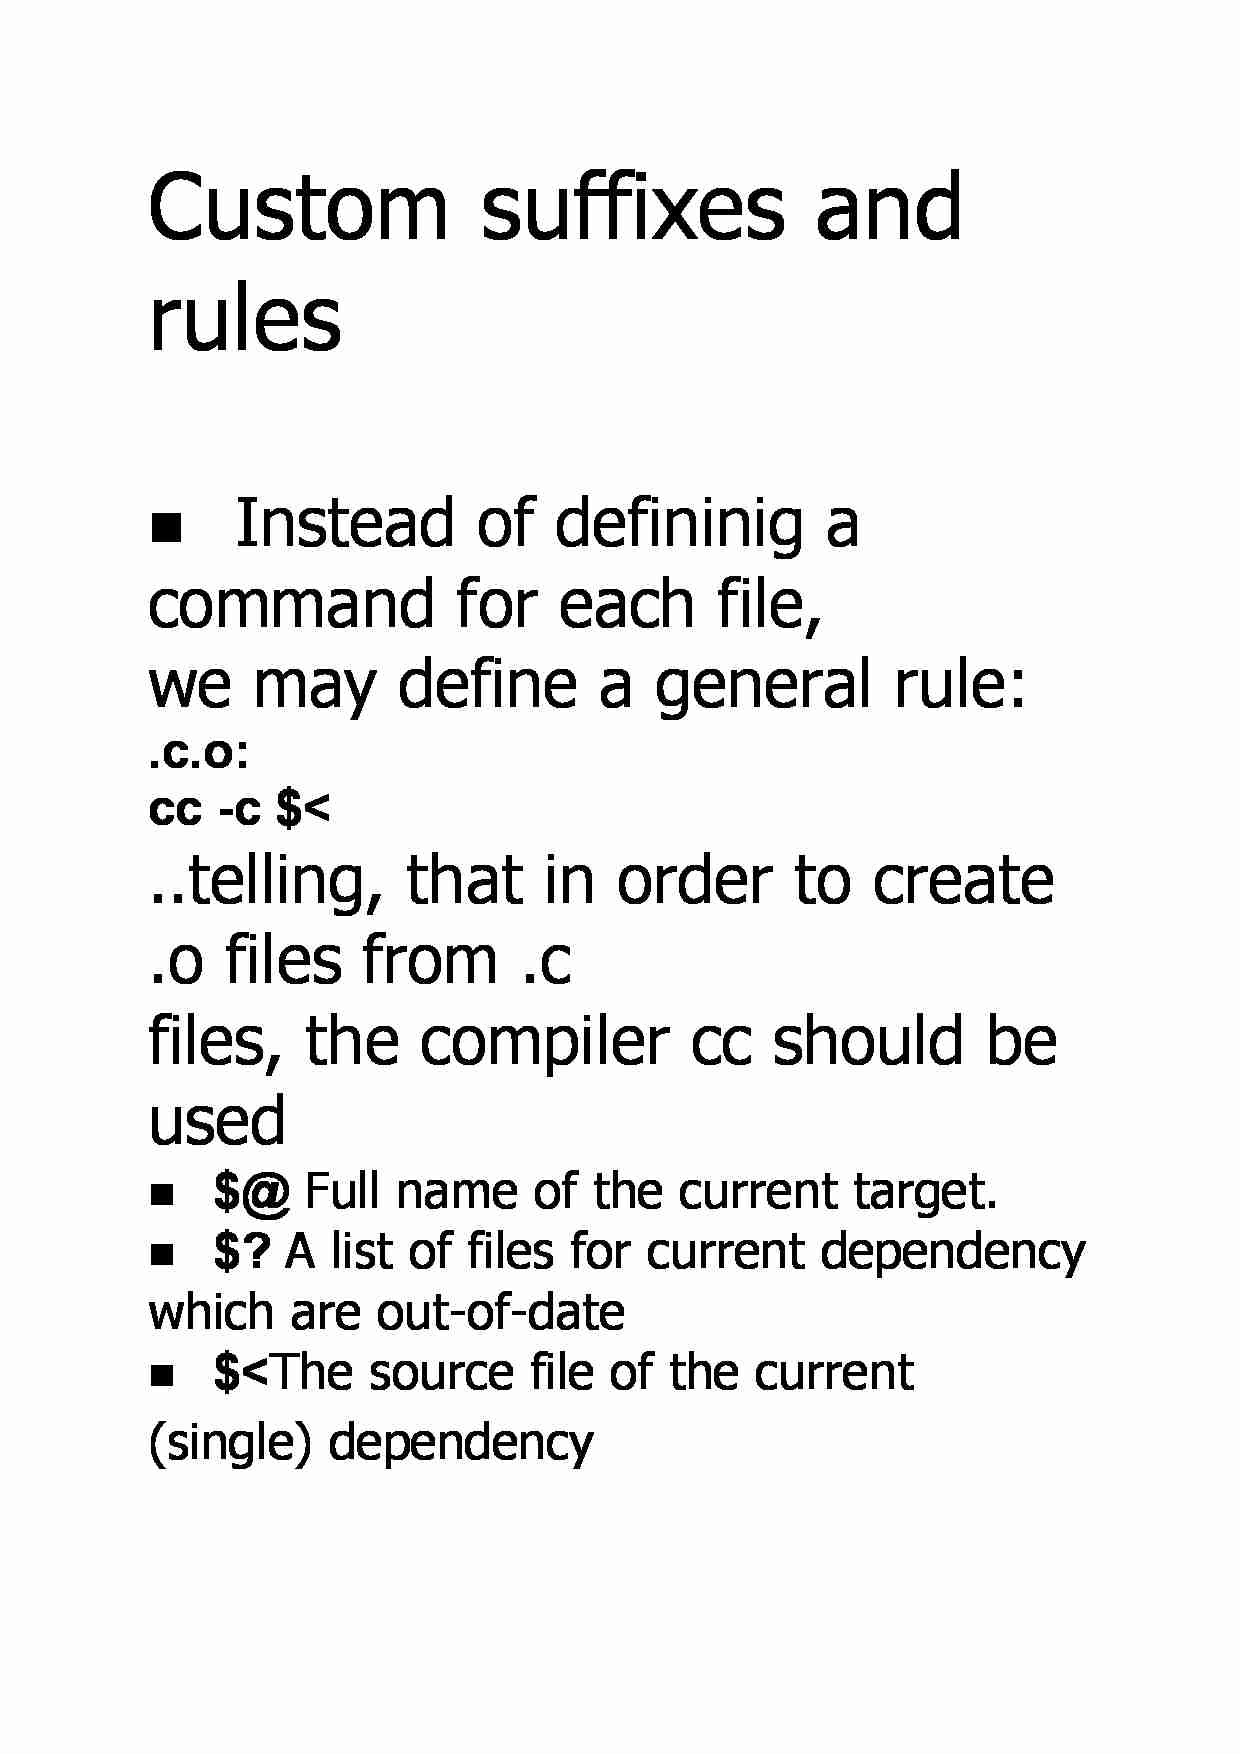 Custom suffixes and rules - strona 1